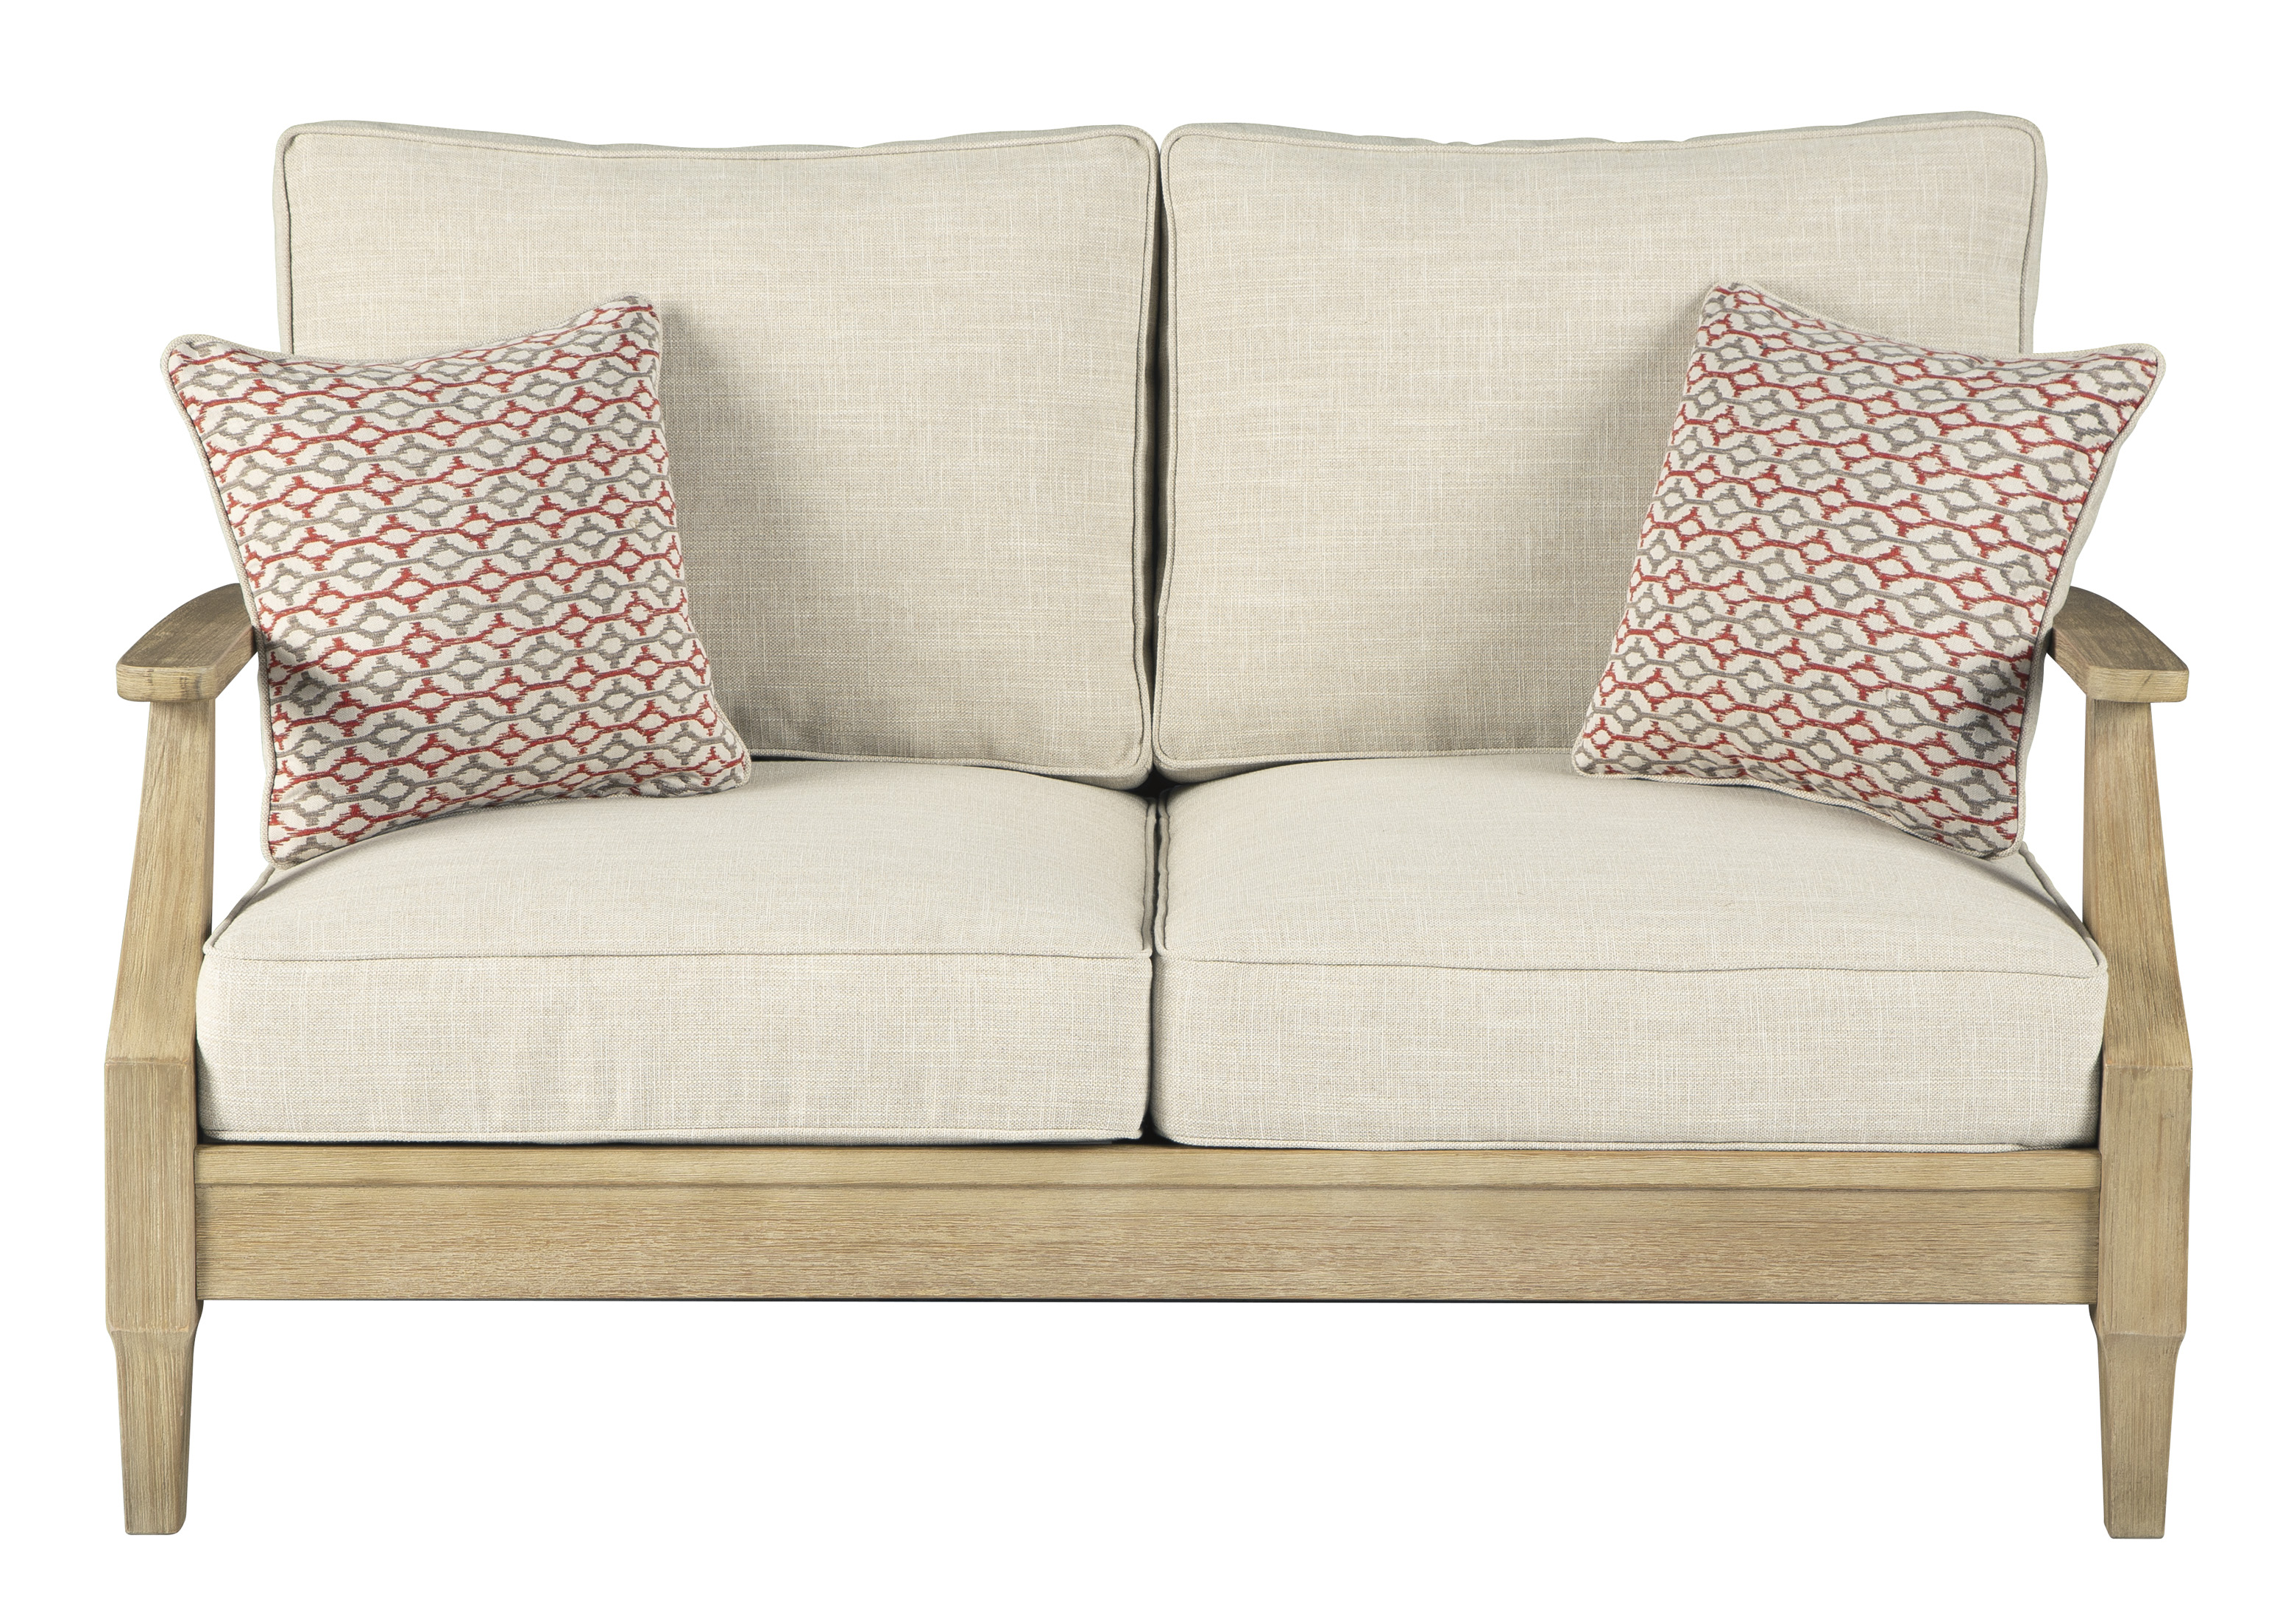 Eucalyptus Wood Frame Clare View Sofa with Cushion Signature Design by Ashley Clare View Outdoor Loveseat with Cushion Eucalyptus Frame Beige & Design by Ashley Beige 